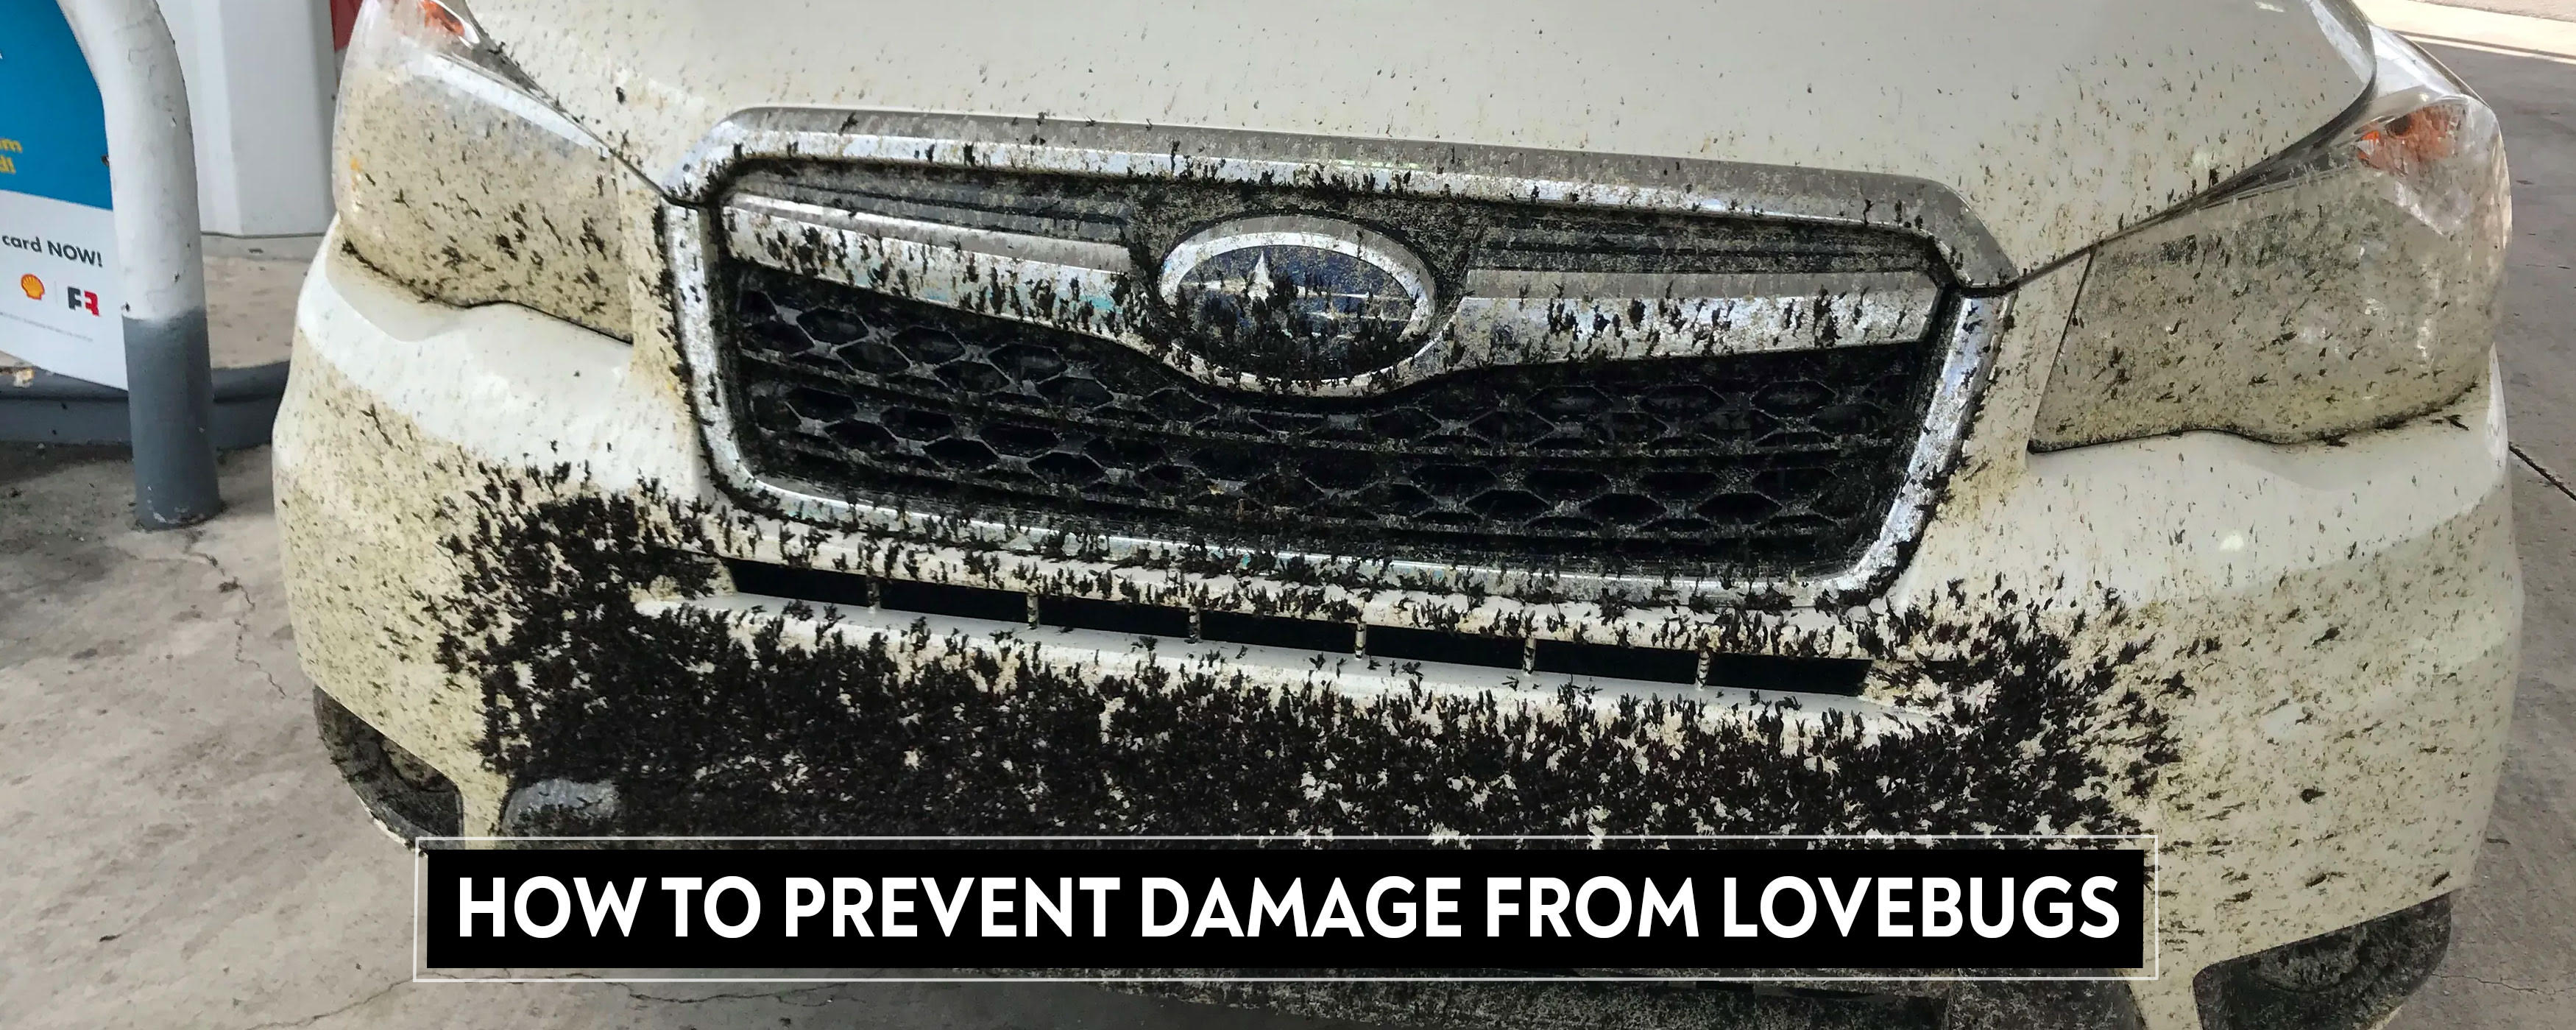 How To Prevent Damage from Lovebugs